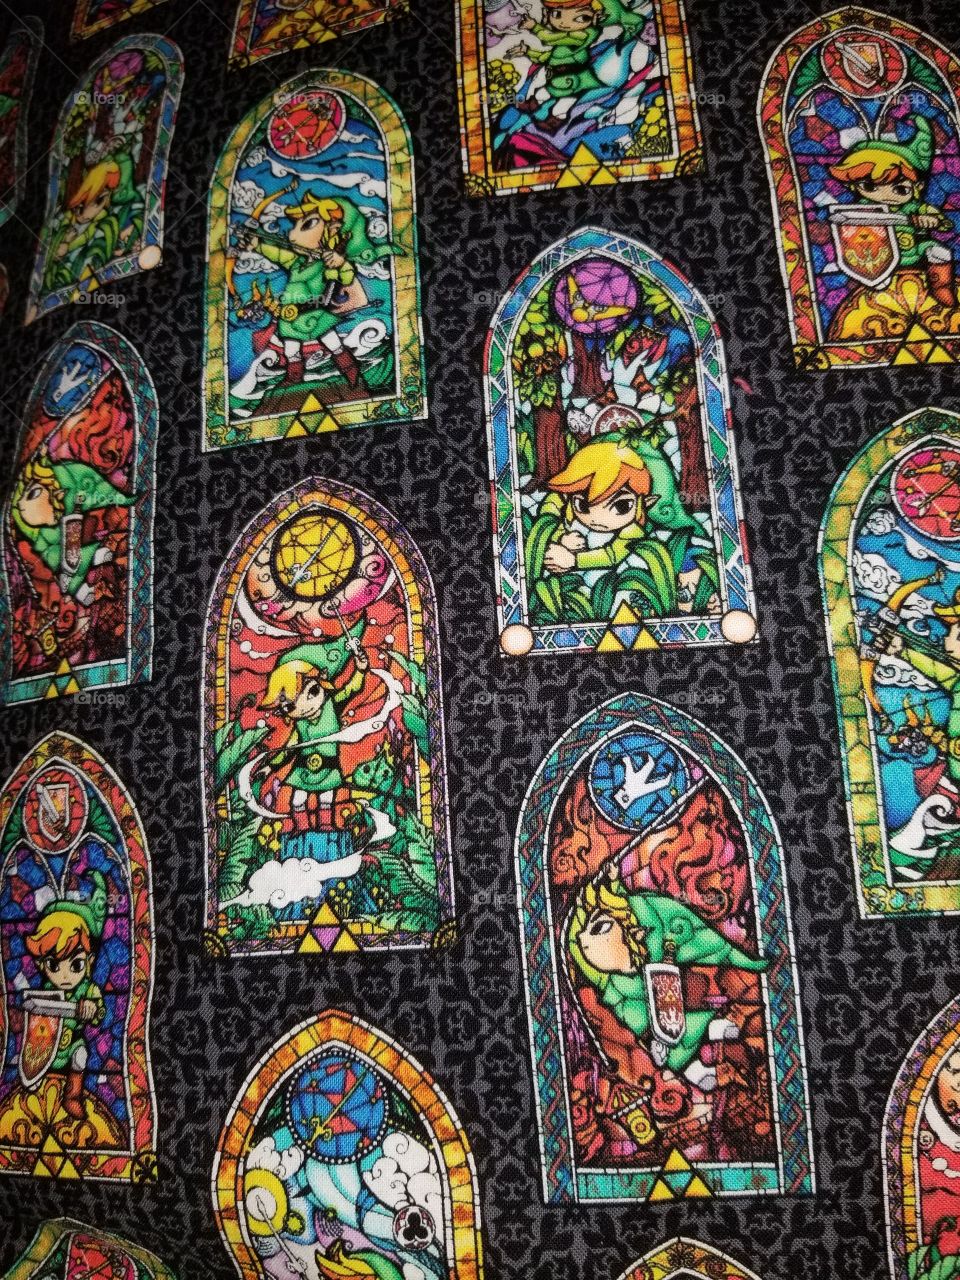 Combination of nostalgic video game on fabric and traditional stain glass windows